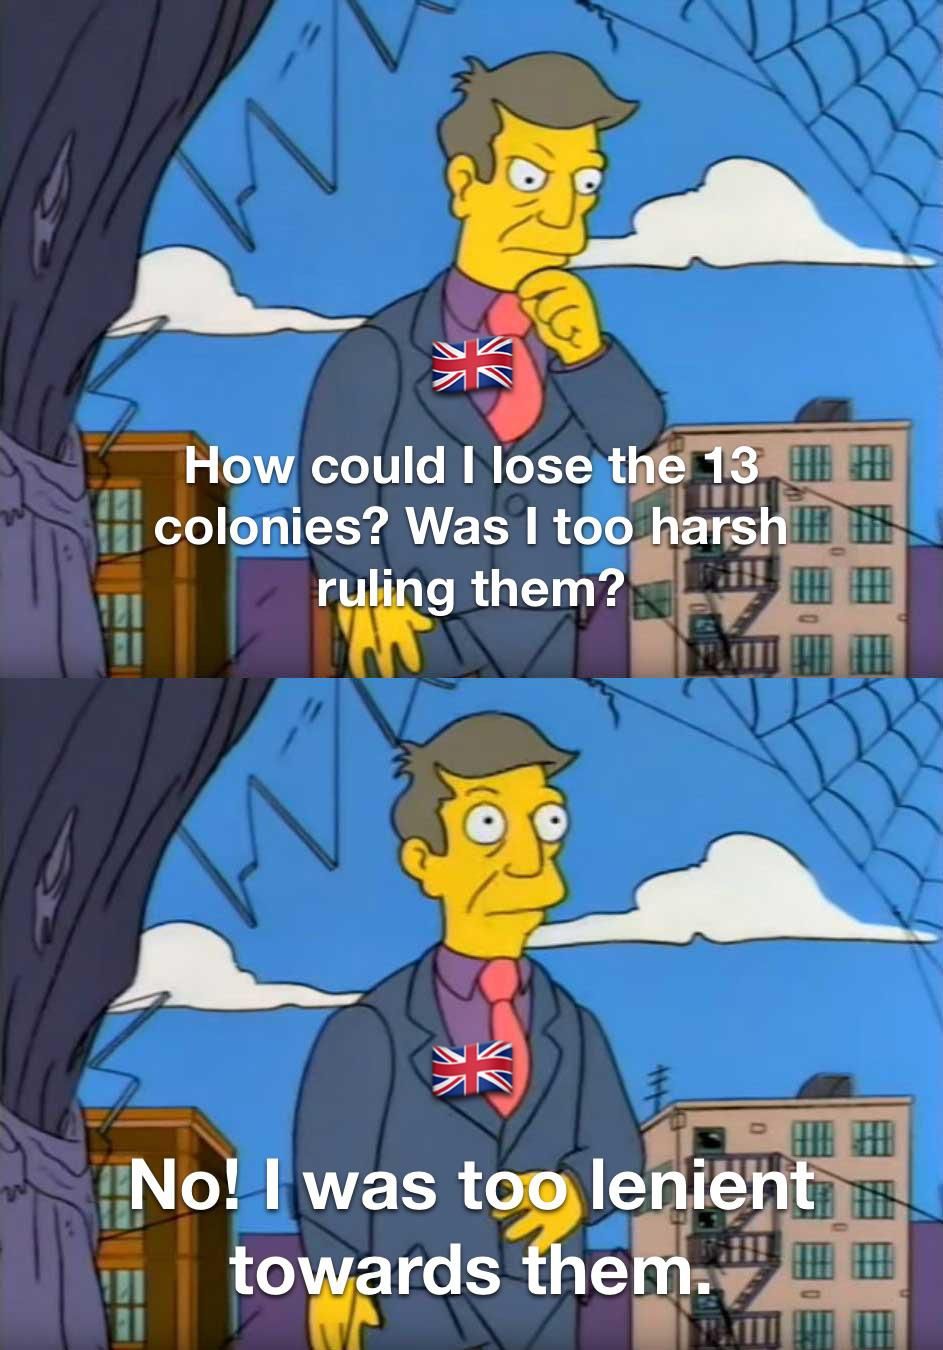 The hot debate in Britain after the American revolution.